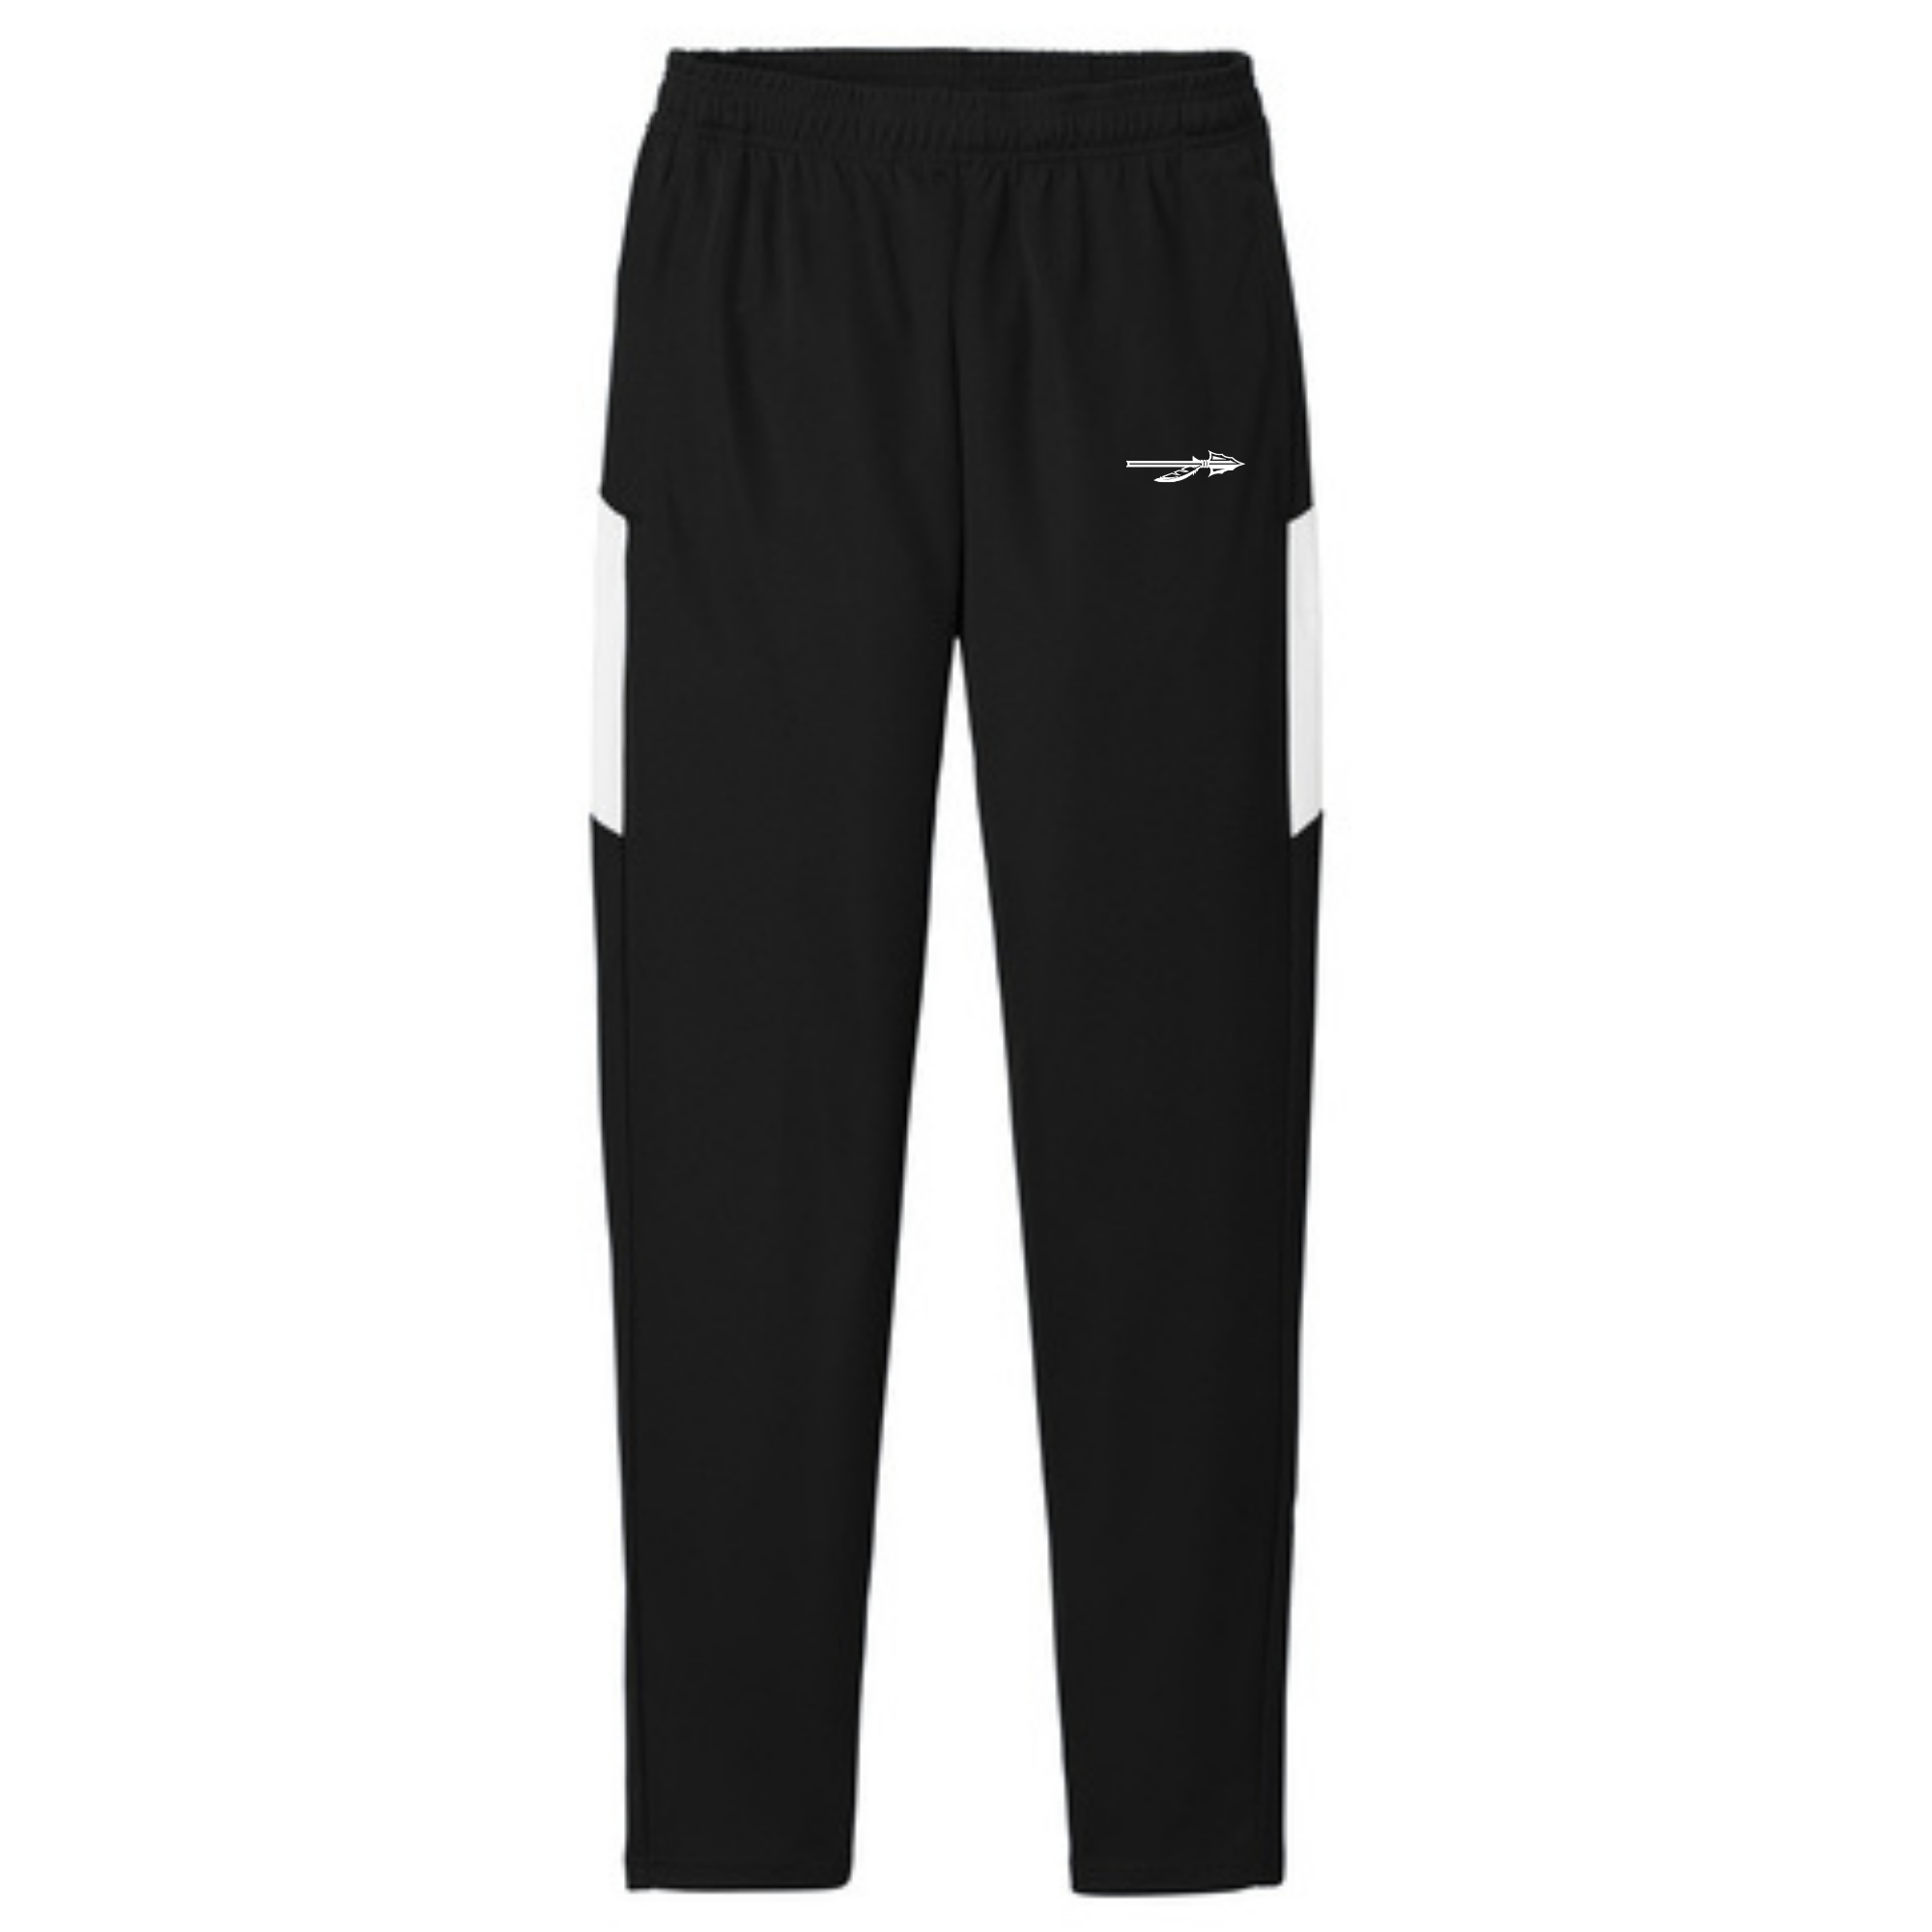 Wilson Track and Field Travel Pant- PST800